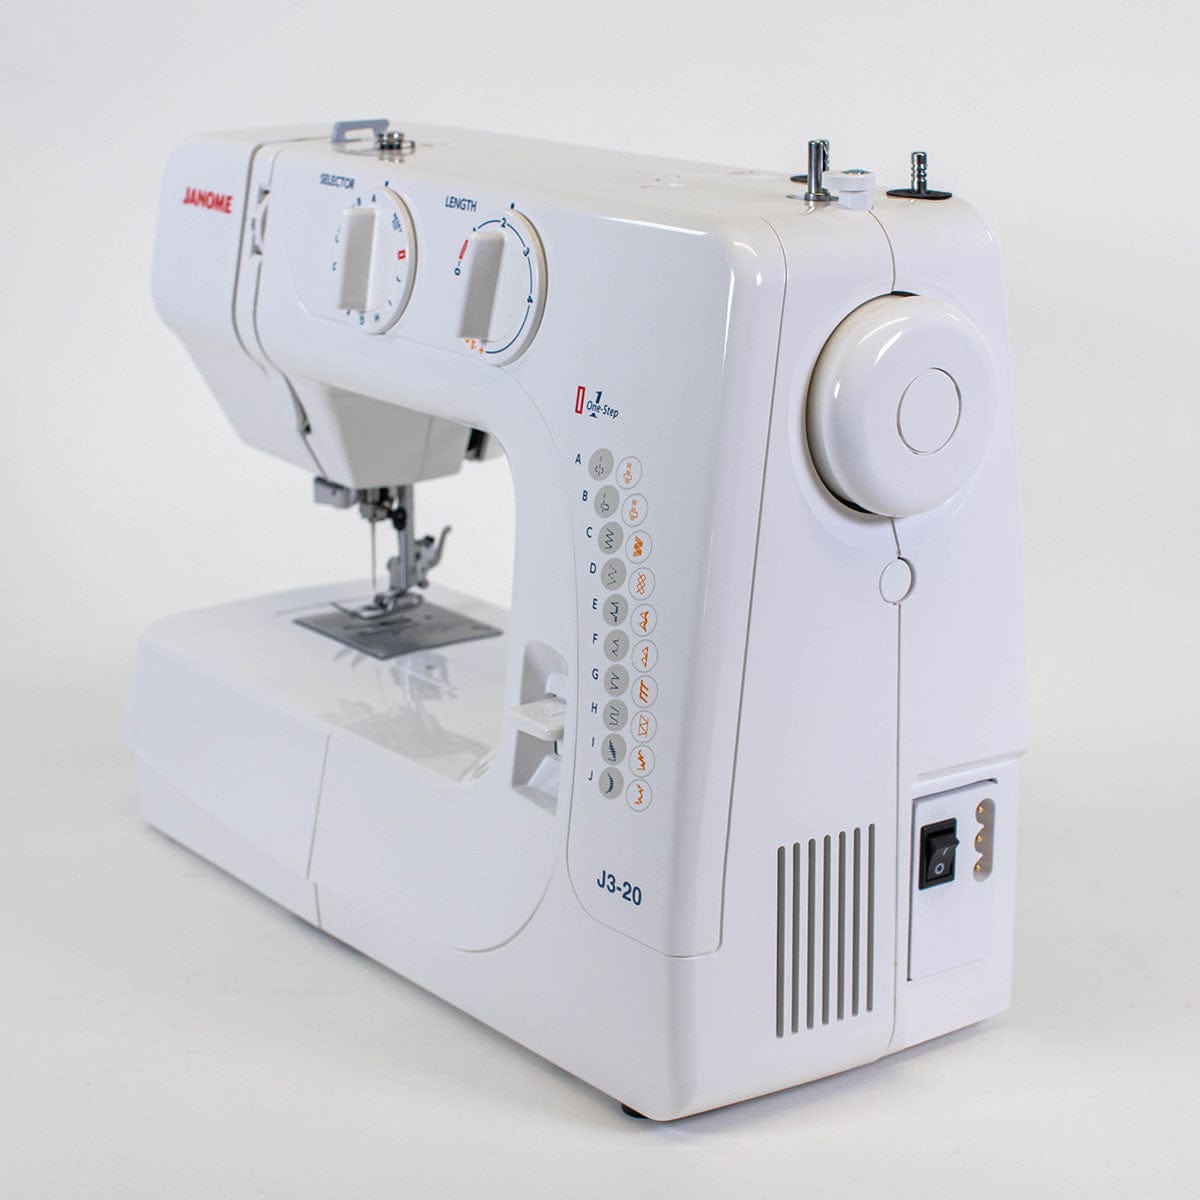 Janome J3-20 Sewing Machine + FREE Concealed Zipper Foot (worth £21)